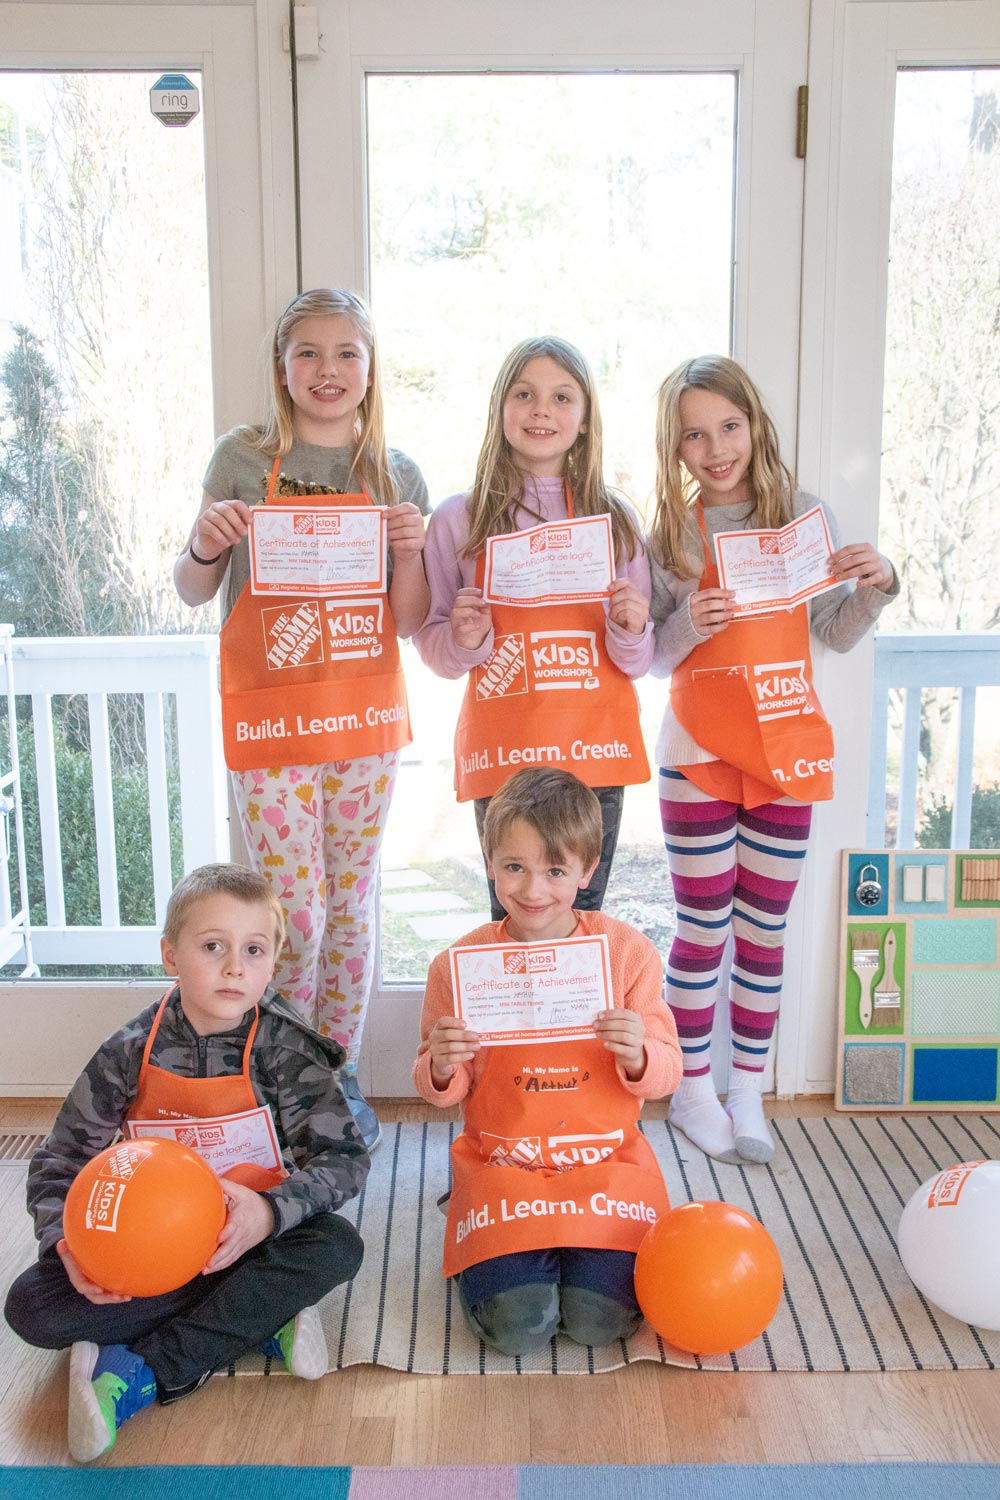 Children with Home Depot kids aprons on holding up certificates of achievement.